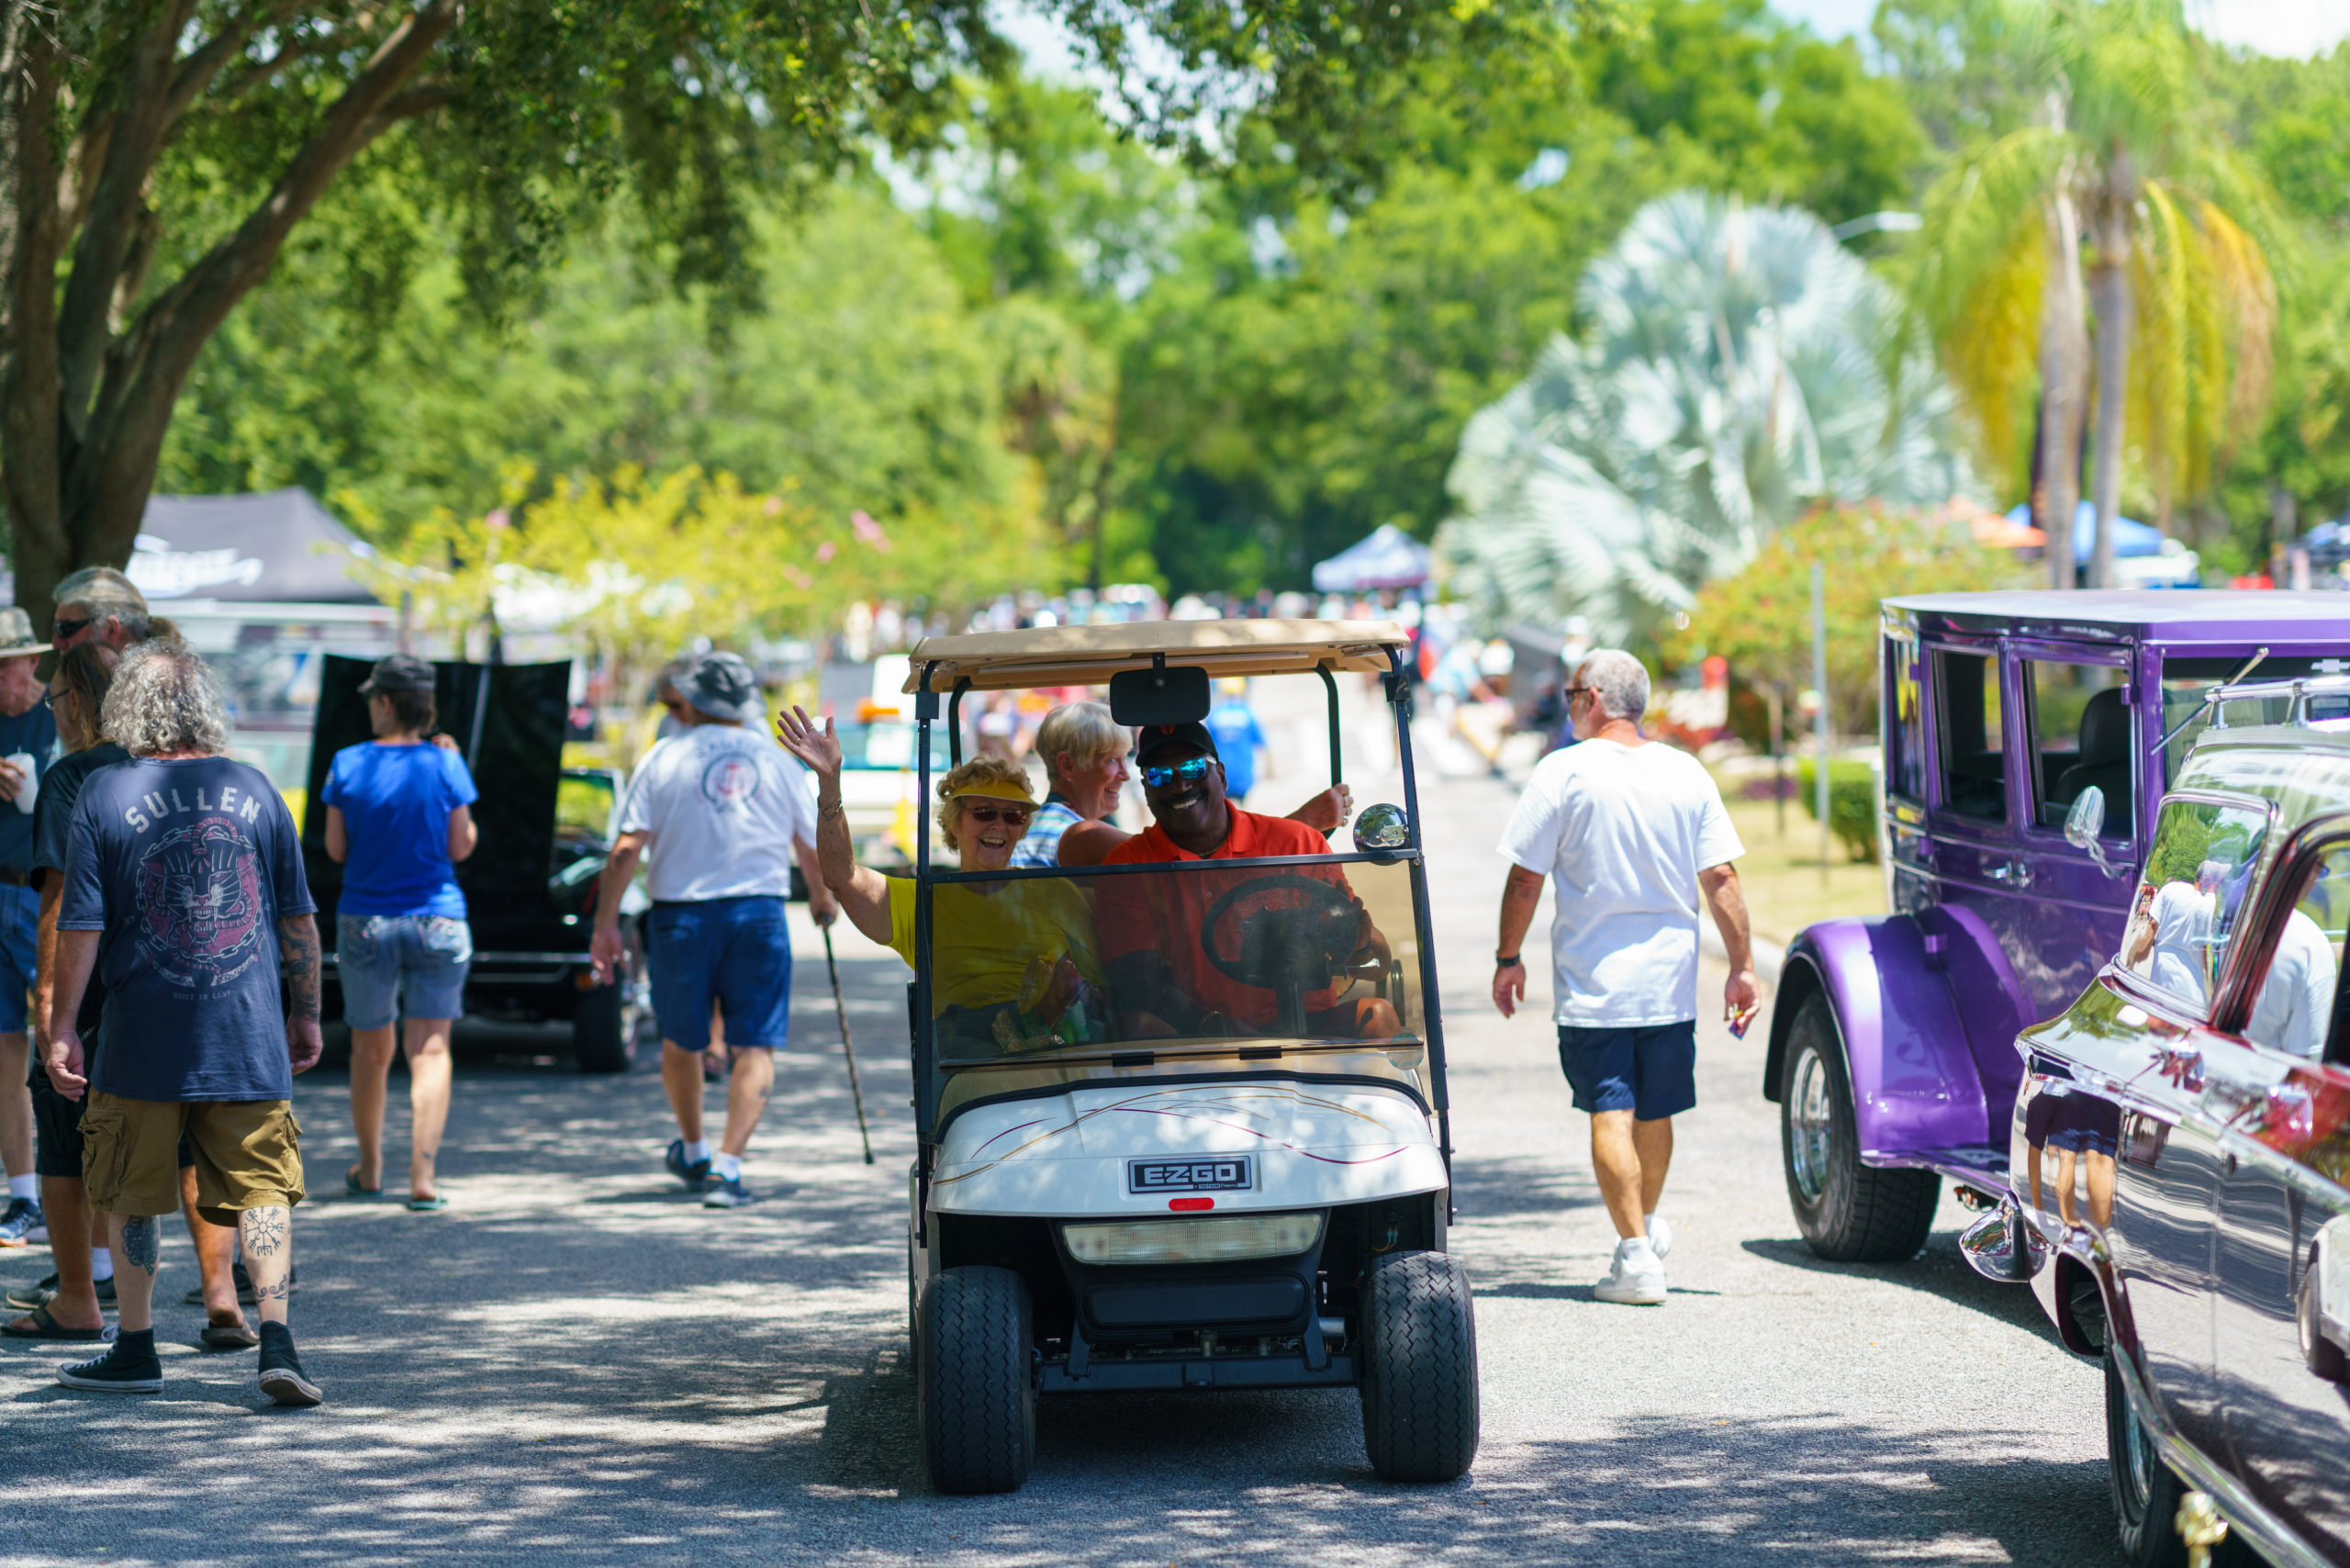 A crowd of people walking down a road lined with classic cars and hot rods, in the middle a golf cart sitting two people who are smiling and joyful as they ride past.